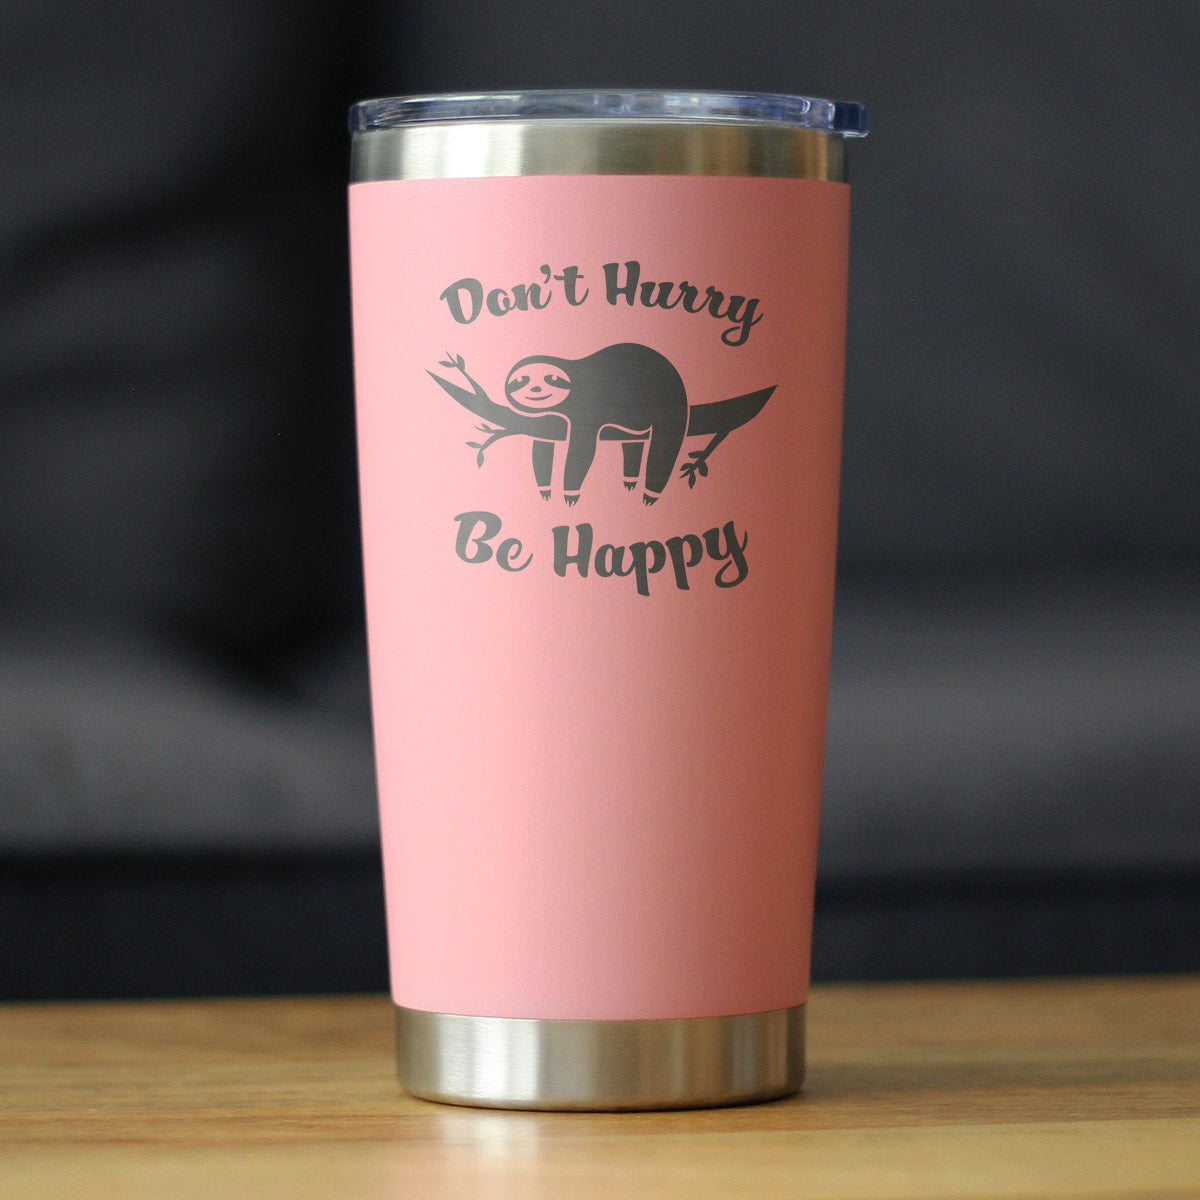 Don&#39;t Hurry Be Happy - Insulated Coffee Tumbler Cup with Sliding Lid - Stainless Steel Travel Mug - Relaxing Funny Sloth Gifts